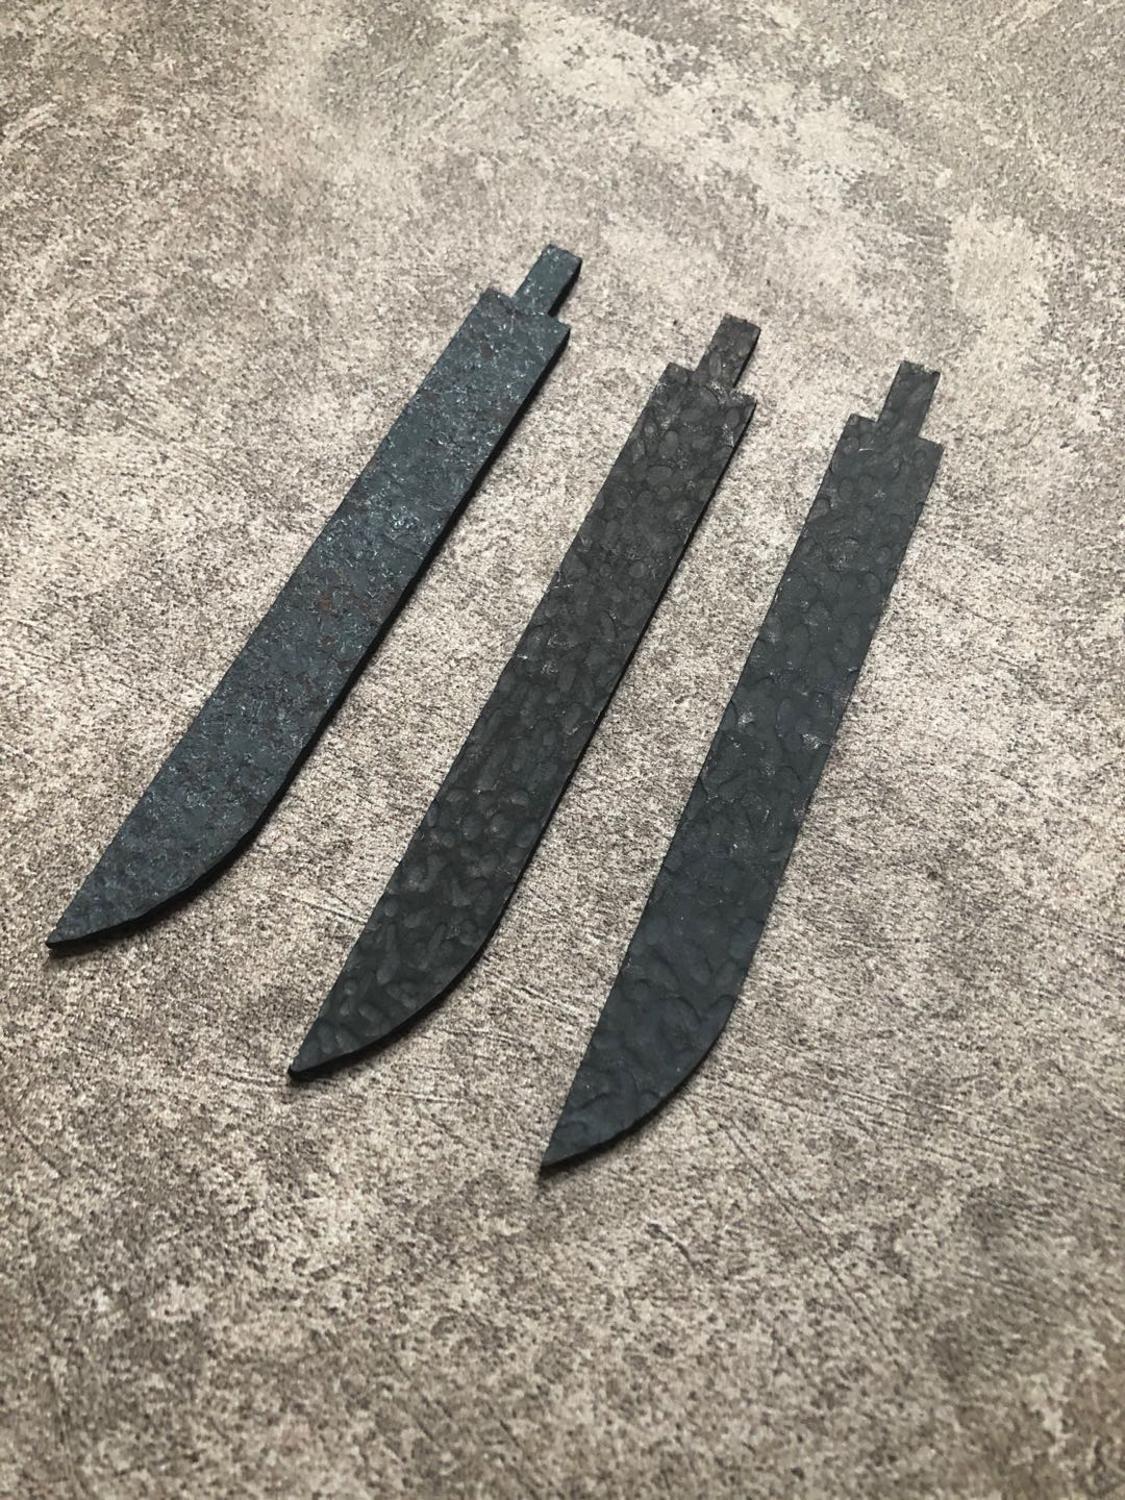 3pices High carbon steel Damascus pattern hunting knives DIY blade billet blank Sharp Fixed blade camping survival knife parts